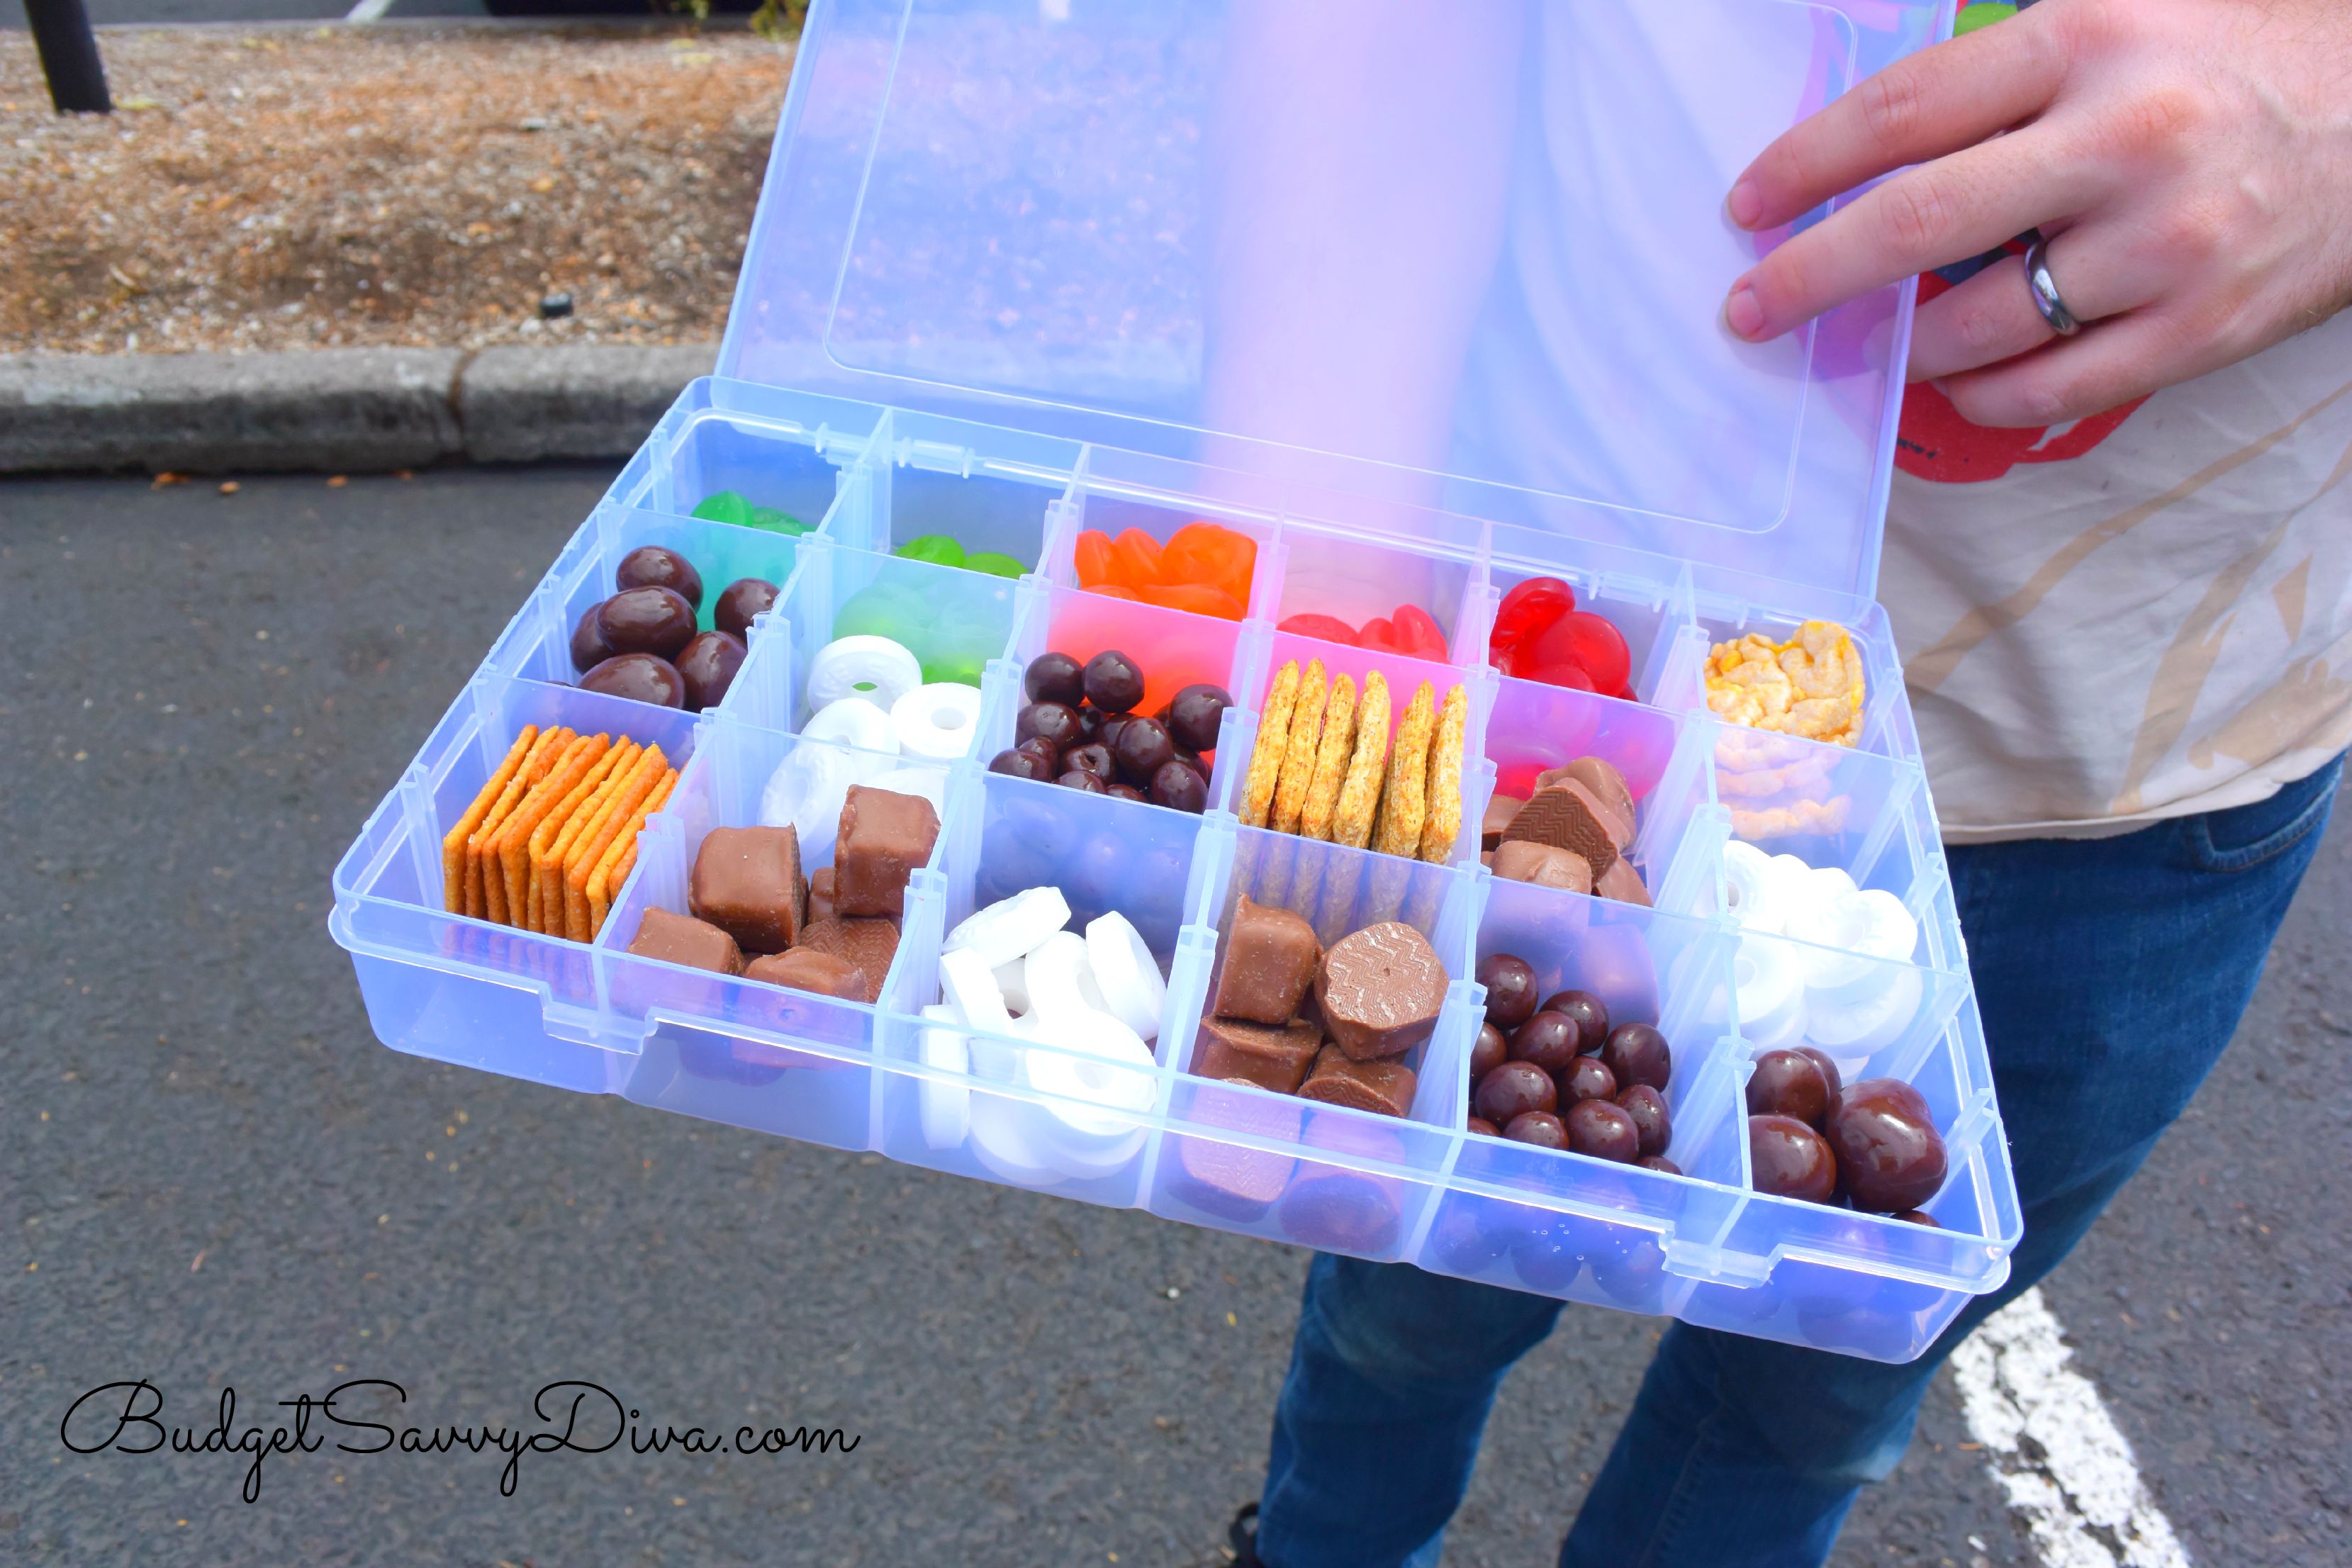 Toddler friendly road trip snack box! A great way for little ones to e